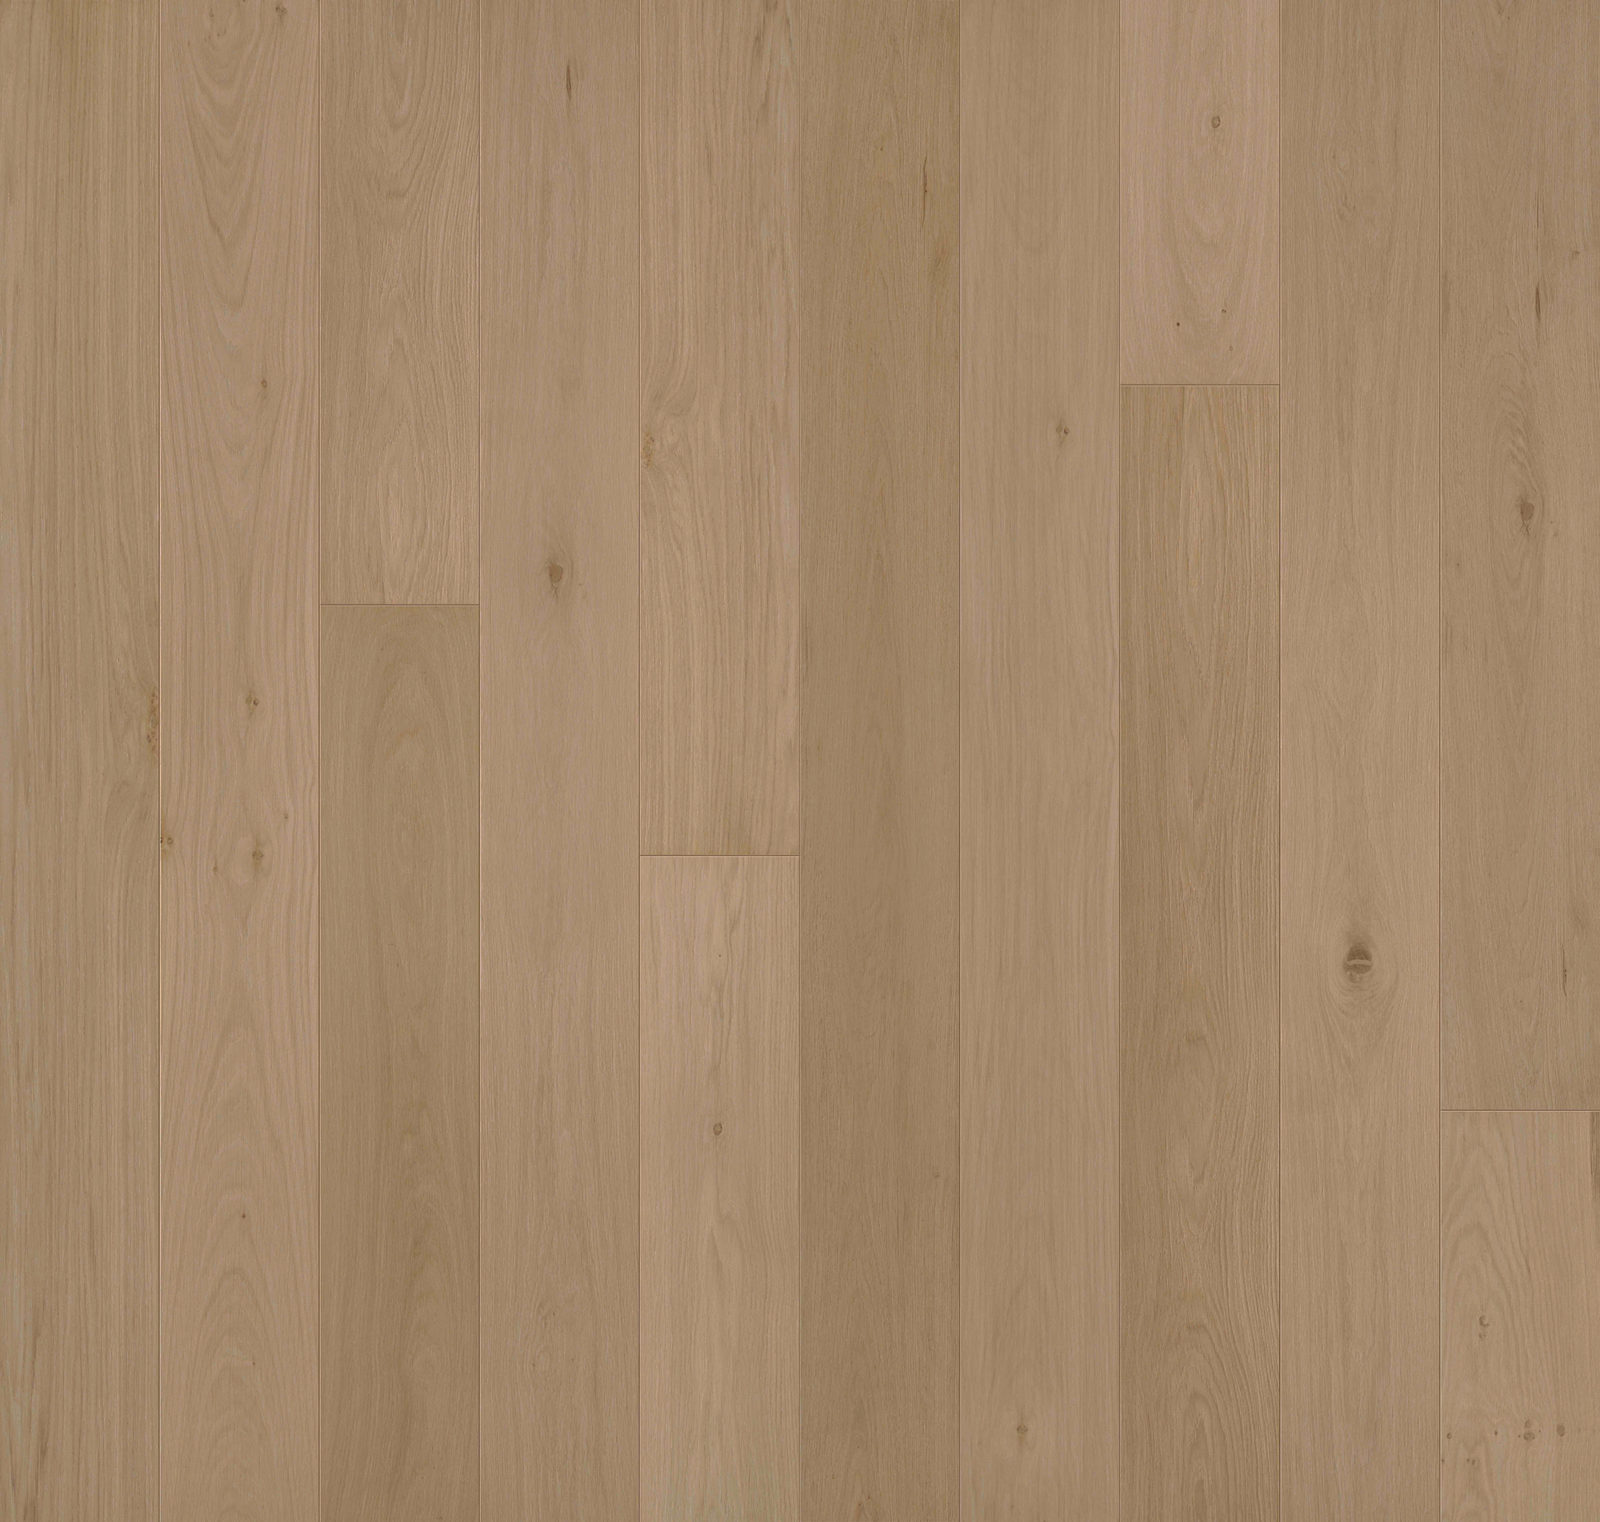 Doma 7-1/2" flooring from the Allora collection